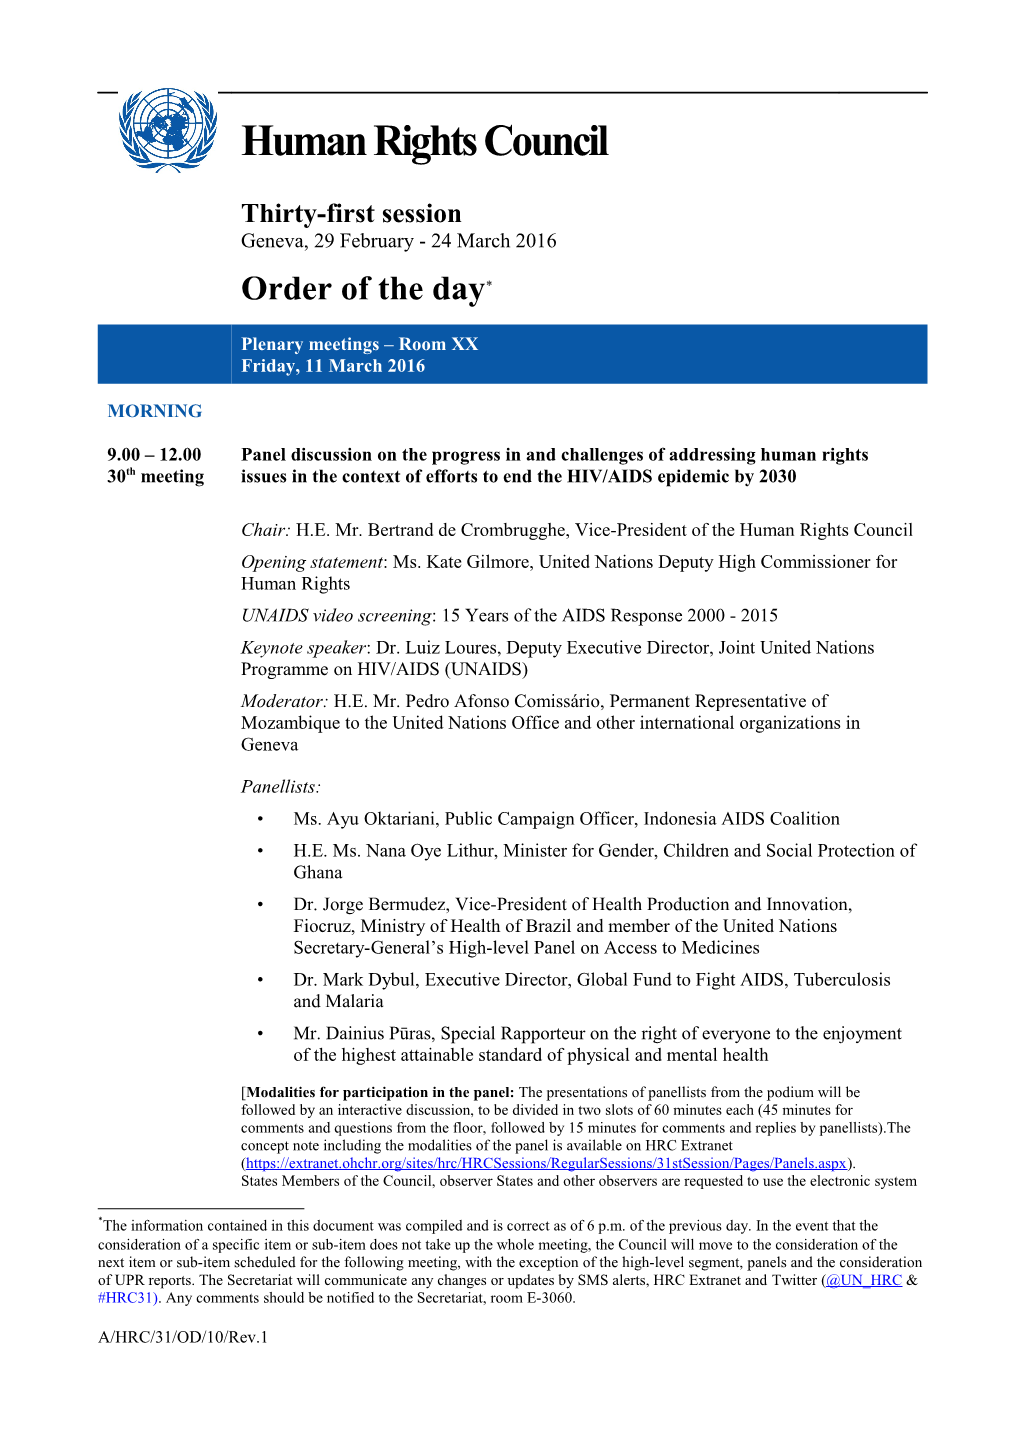 Order of the Day, Friday 11 March 2016